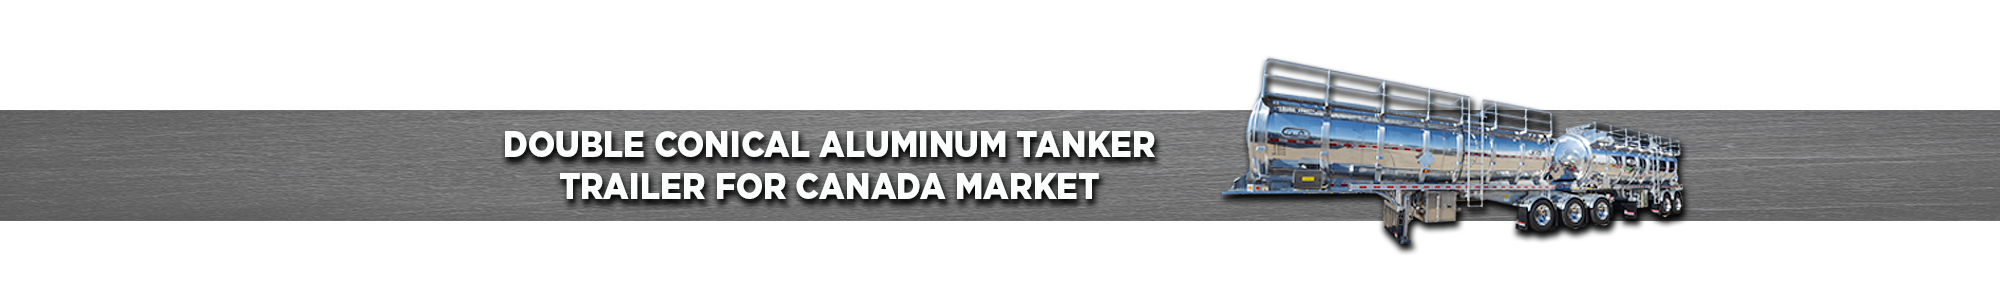 Double Conical Aluminum Tanker Trailer for Canadian Market